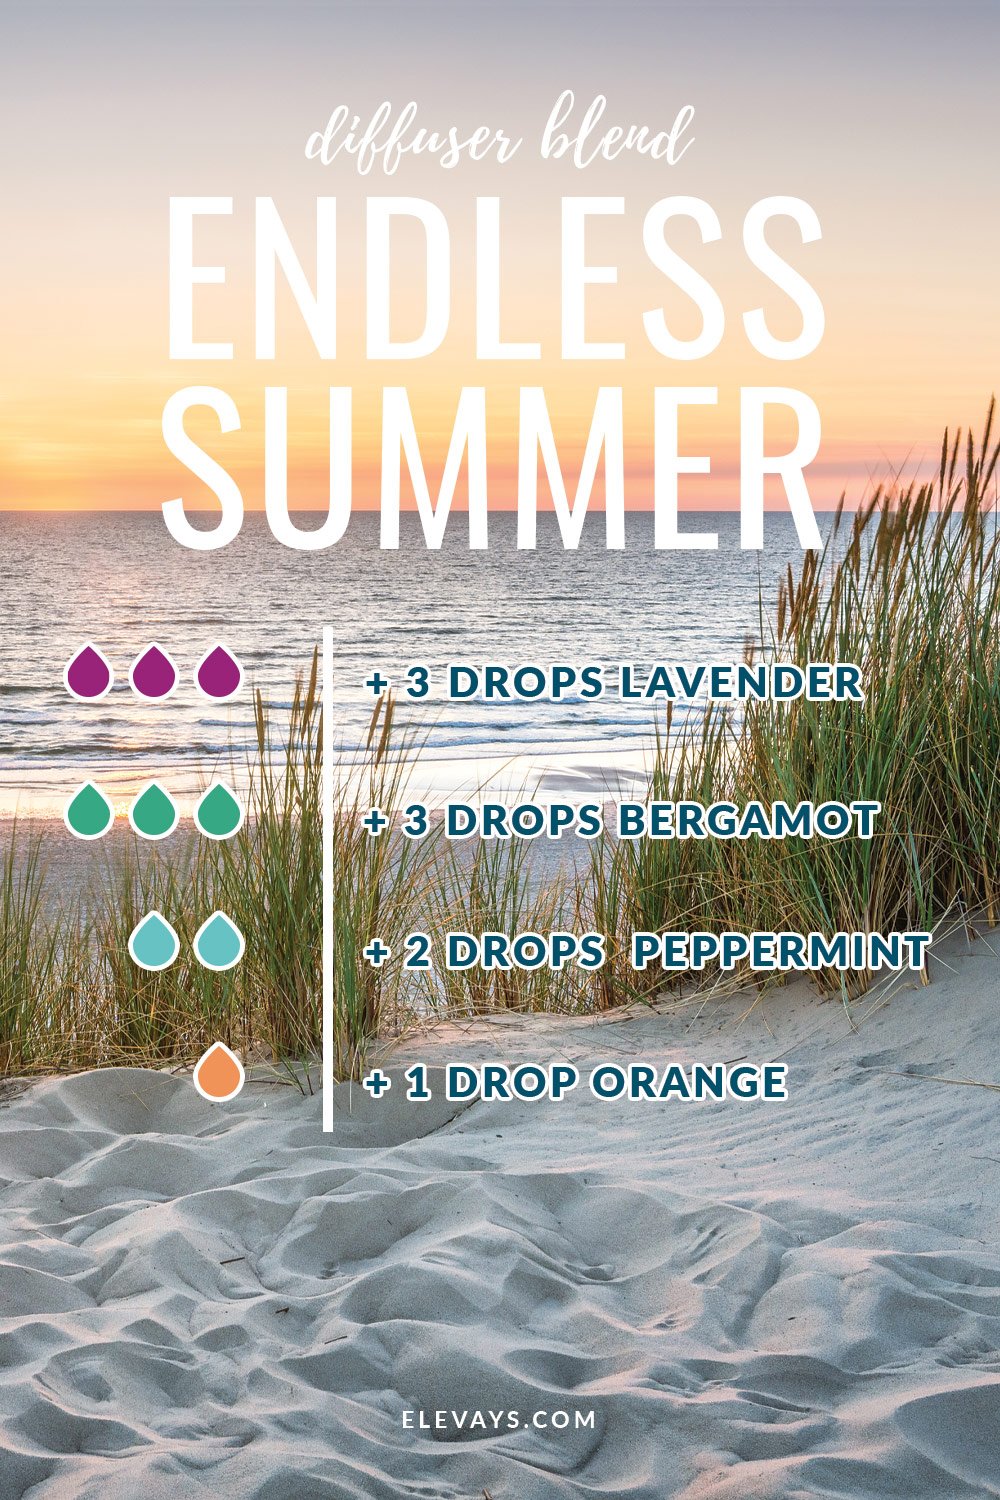 Essential Oil Diffuser Blend Recipe DIY - Endless Summer for Stress Relief